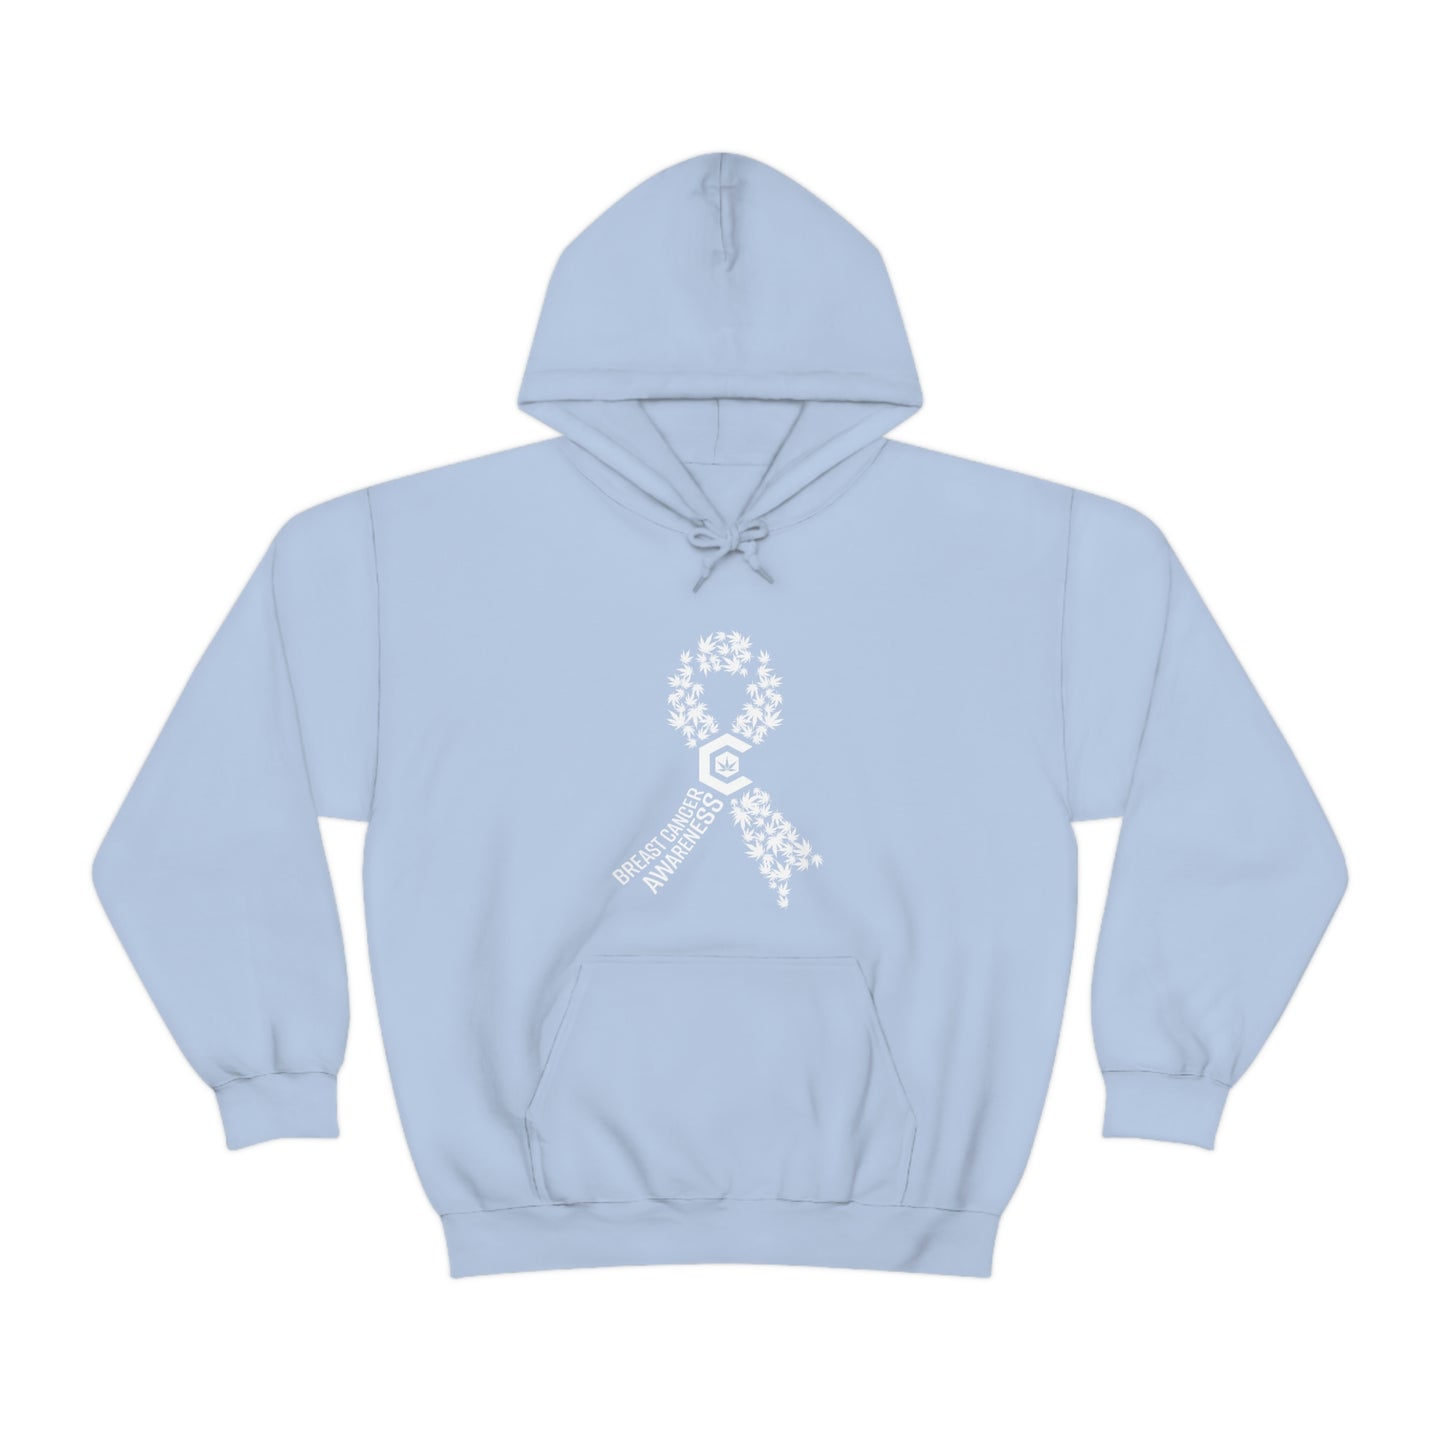 a Breast Cancer Awareness Cannabis Pullover Hoodie with a white ribbon on it.